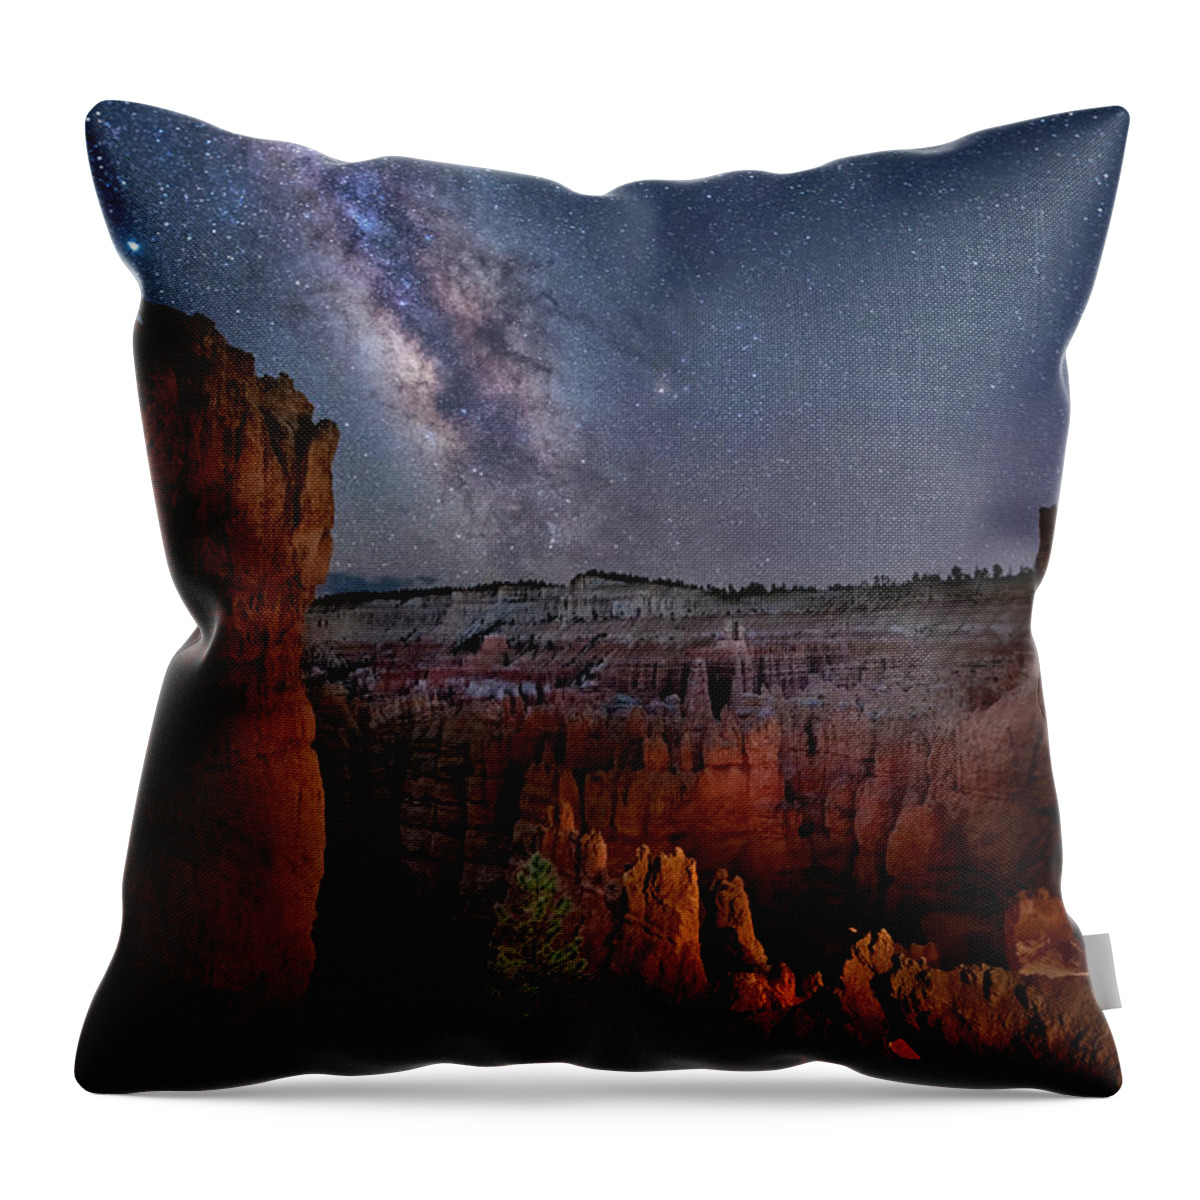 Bryce Throw Pillow featuring the photograph Milky Way Over Bryce Canyon by Michael Ash